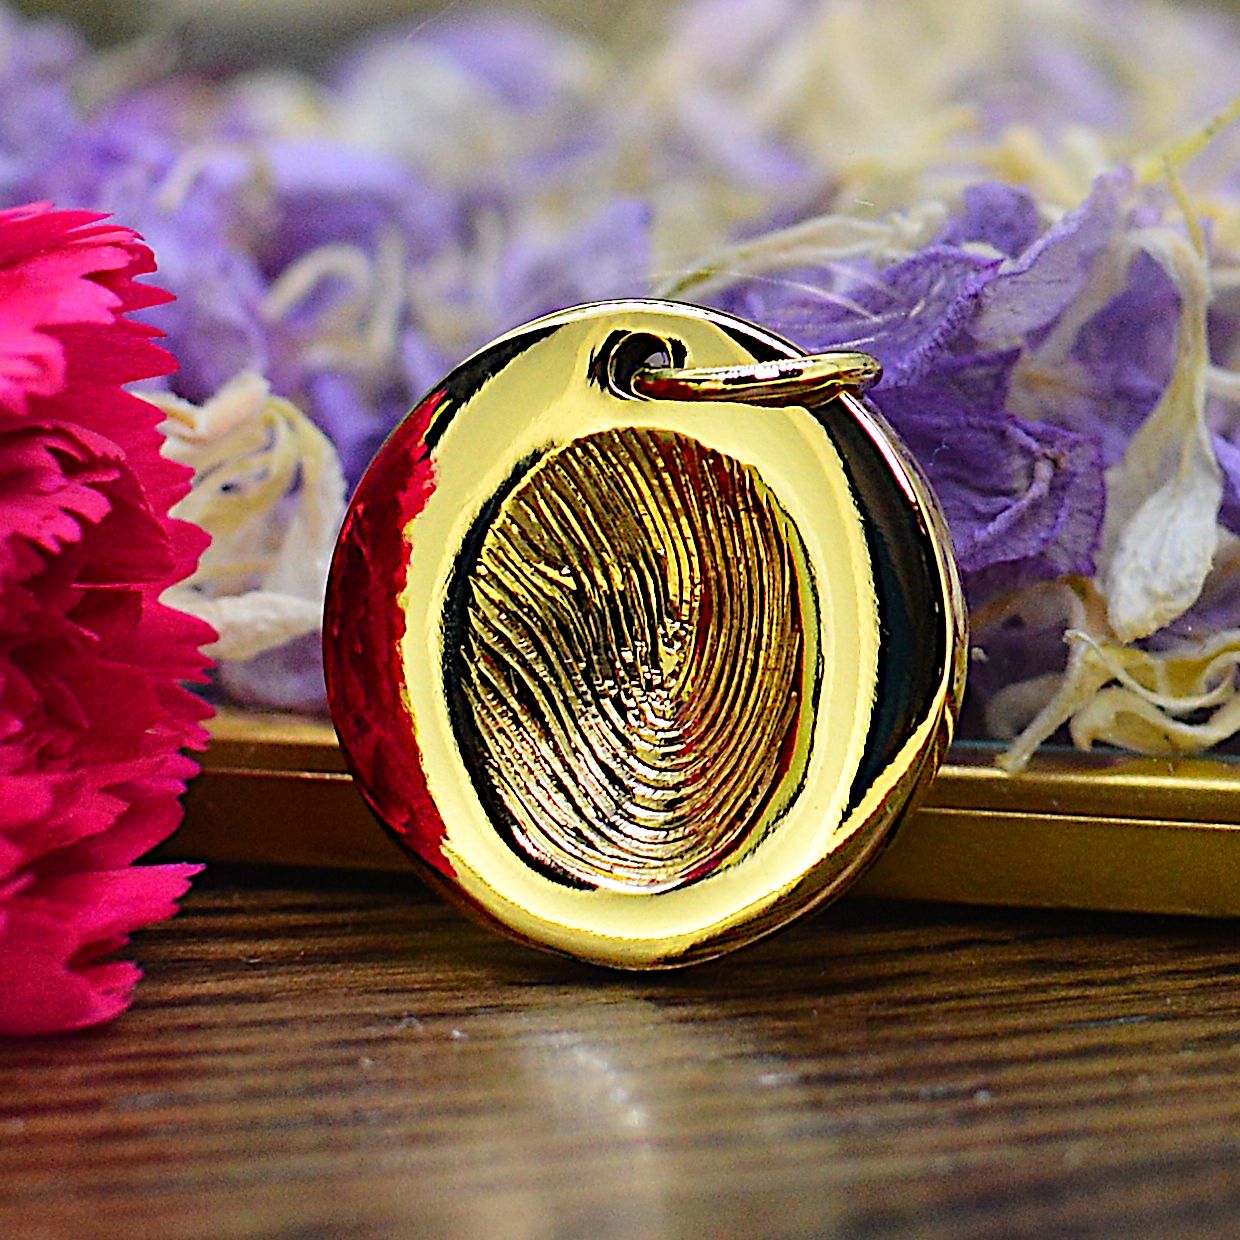 A solid gold disc-shaped necklace featuring an engraved fingerprint sits on a dark wooden background.  There is a ornate glass box behind it containing purple and white petals.  There is a pink carnation flower to the left side. 